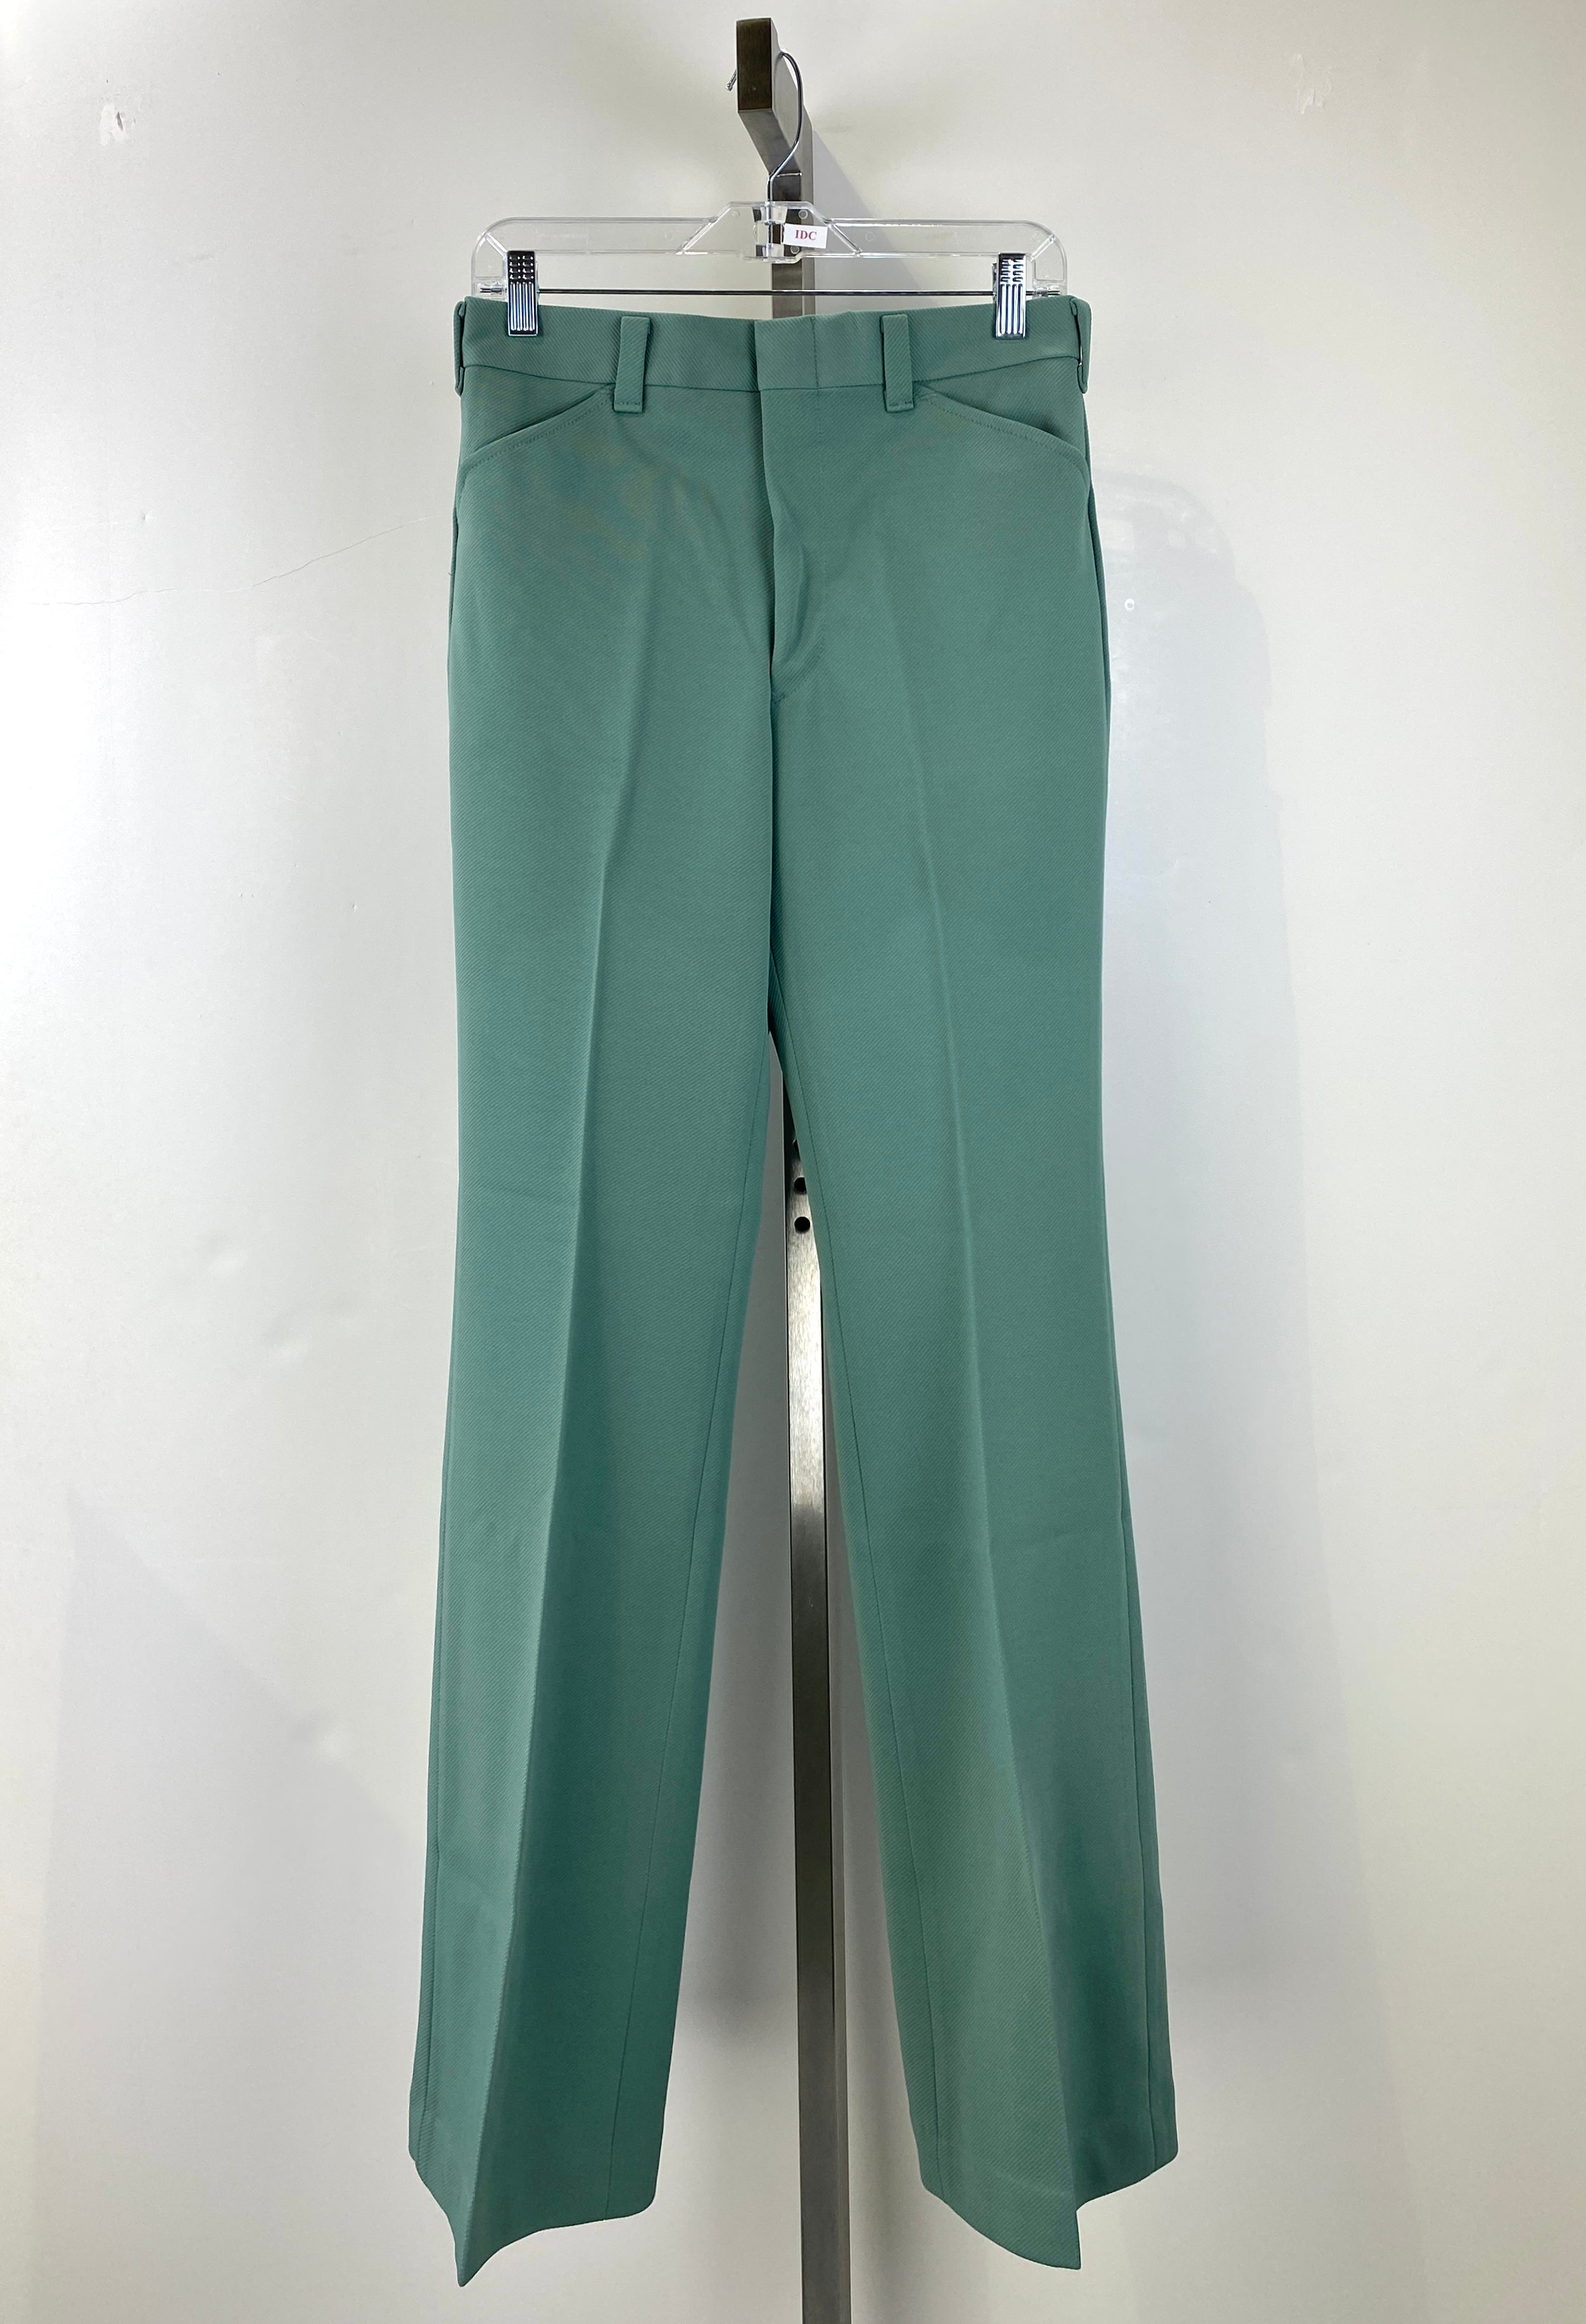 90s Deadstock Flared Chino Trousers